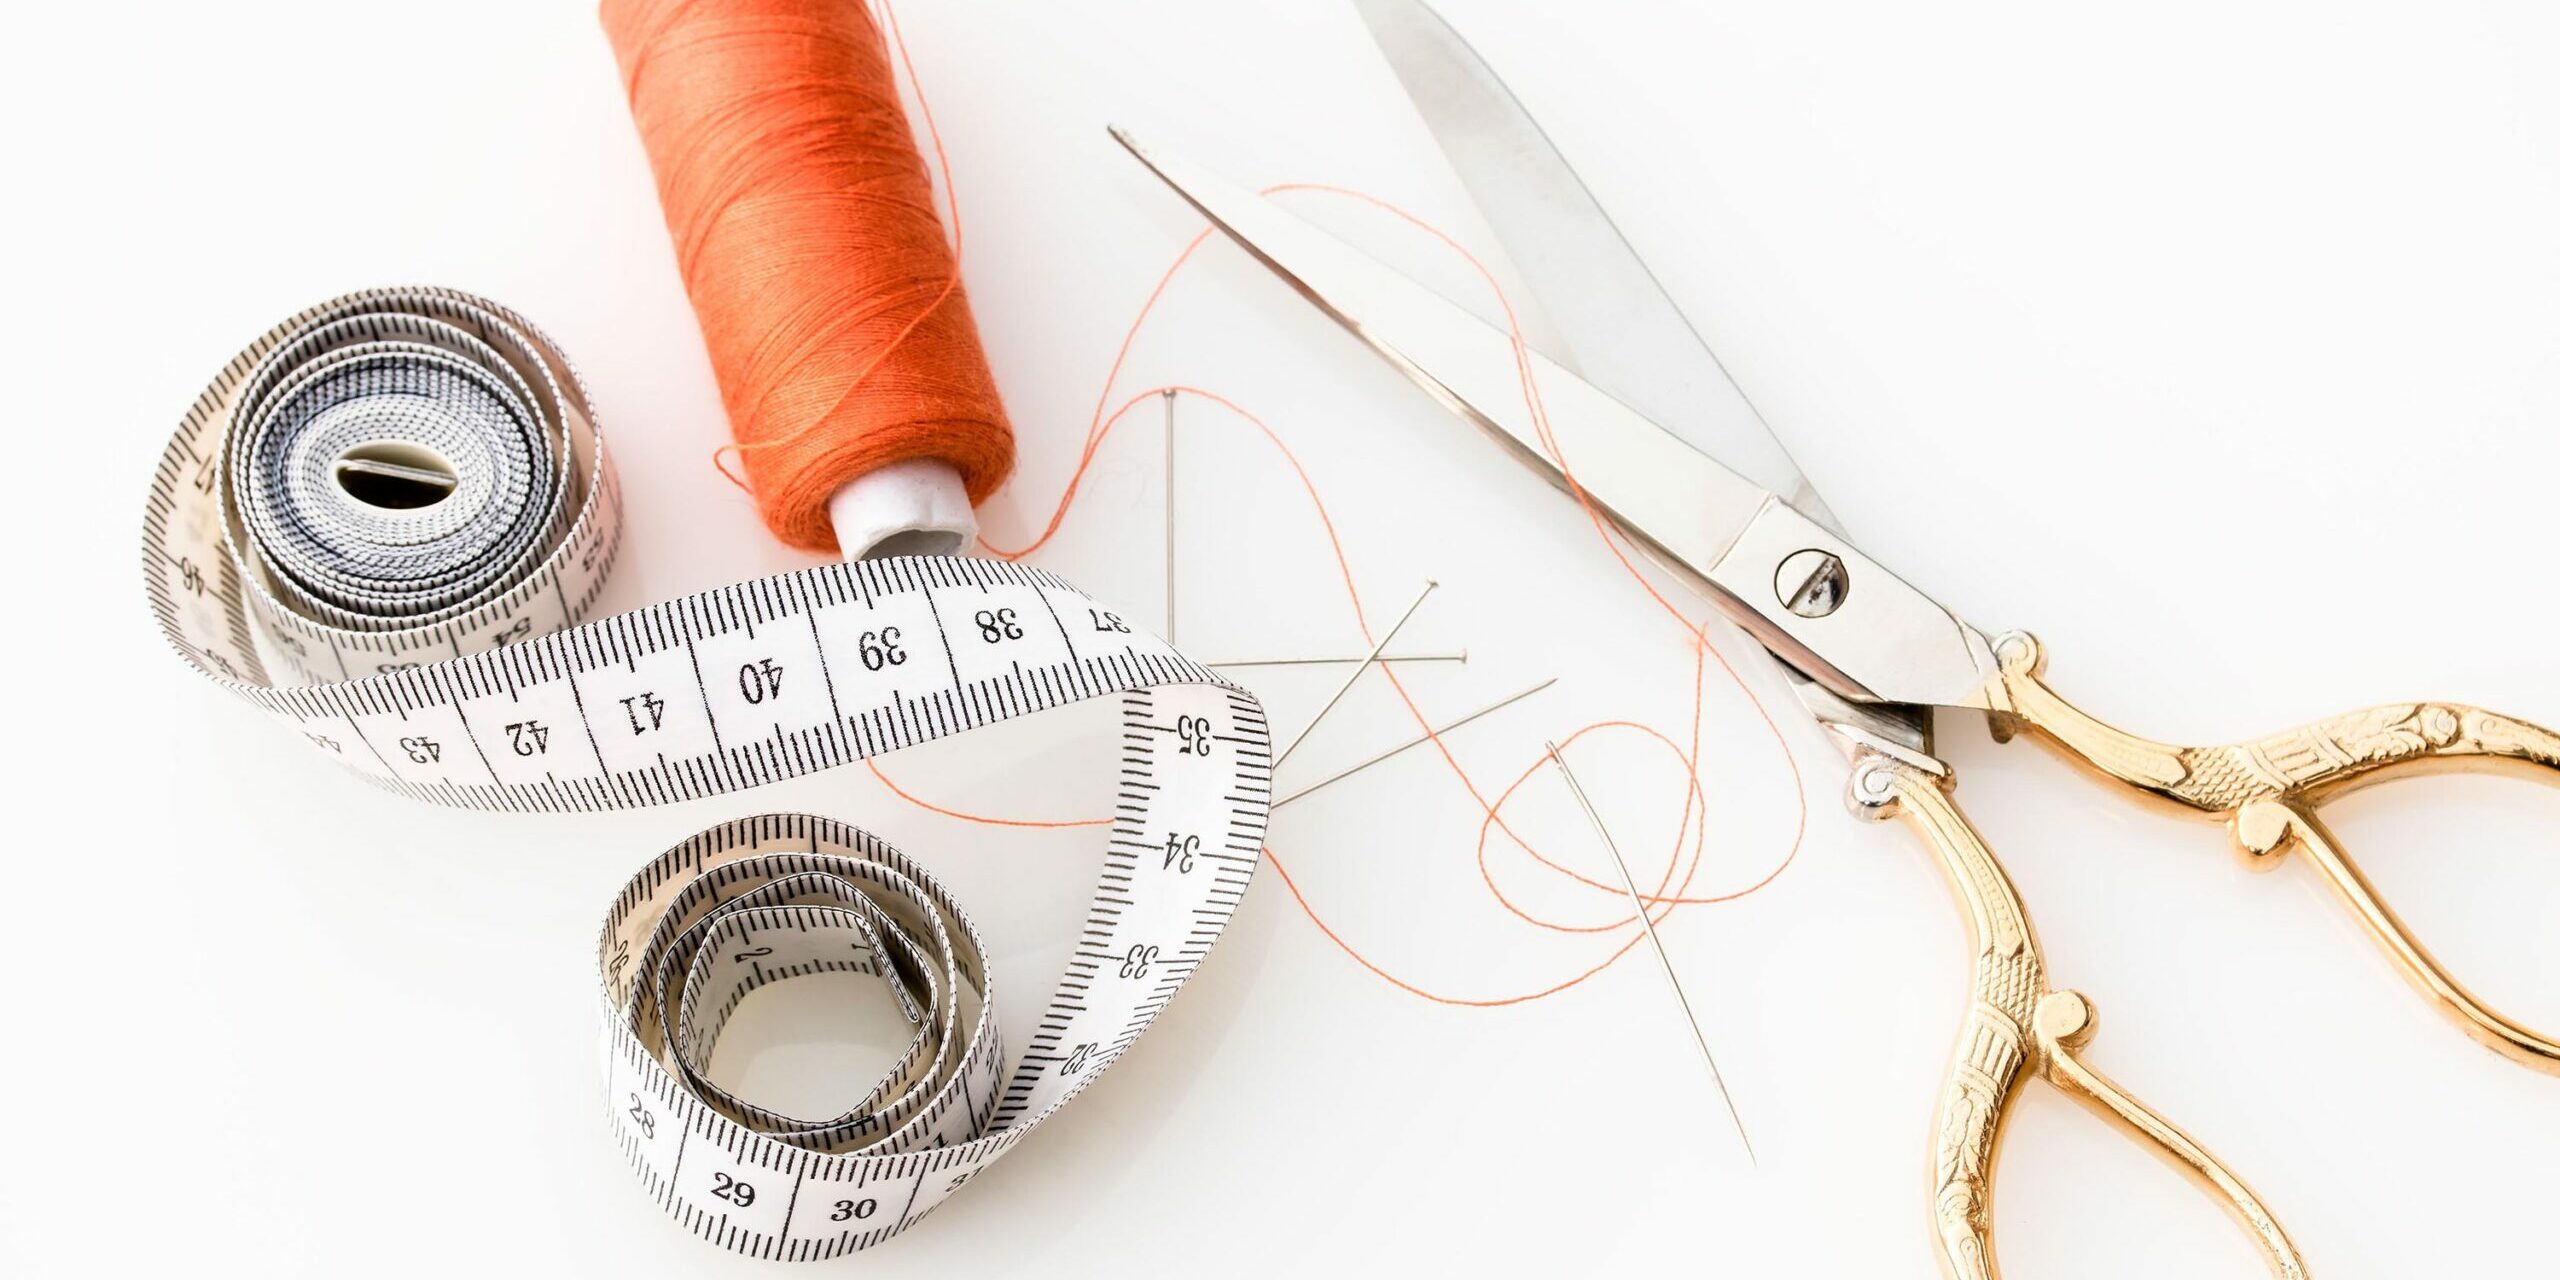 thread, scissors, and measuring tape on white background - tailor your resume to job description